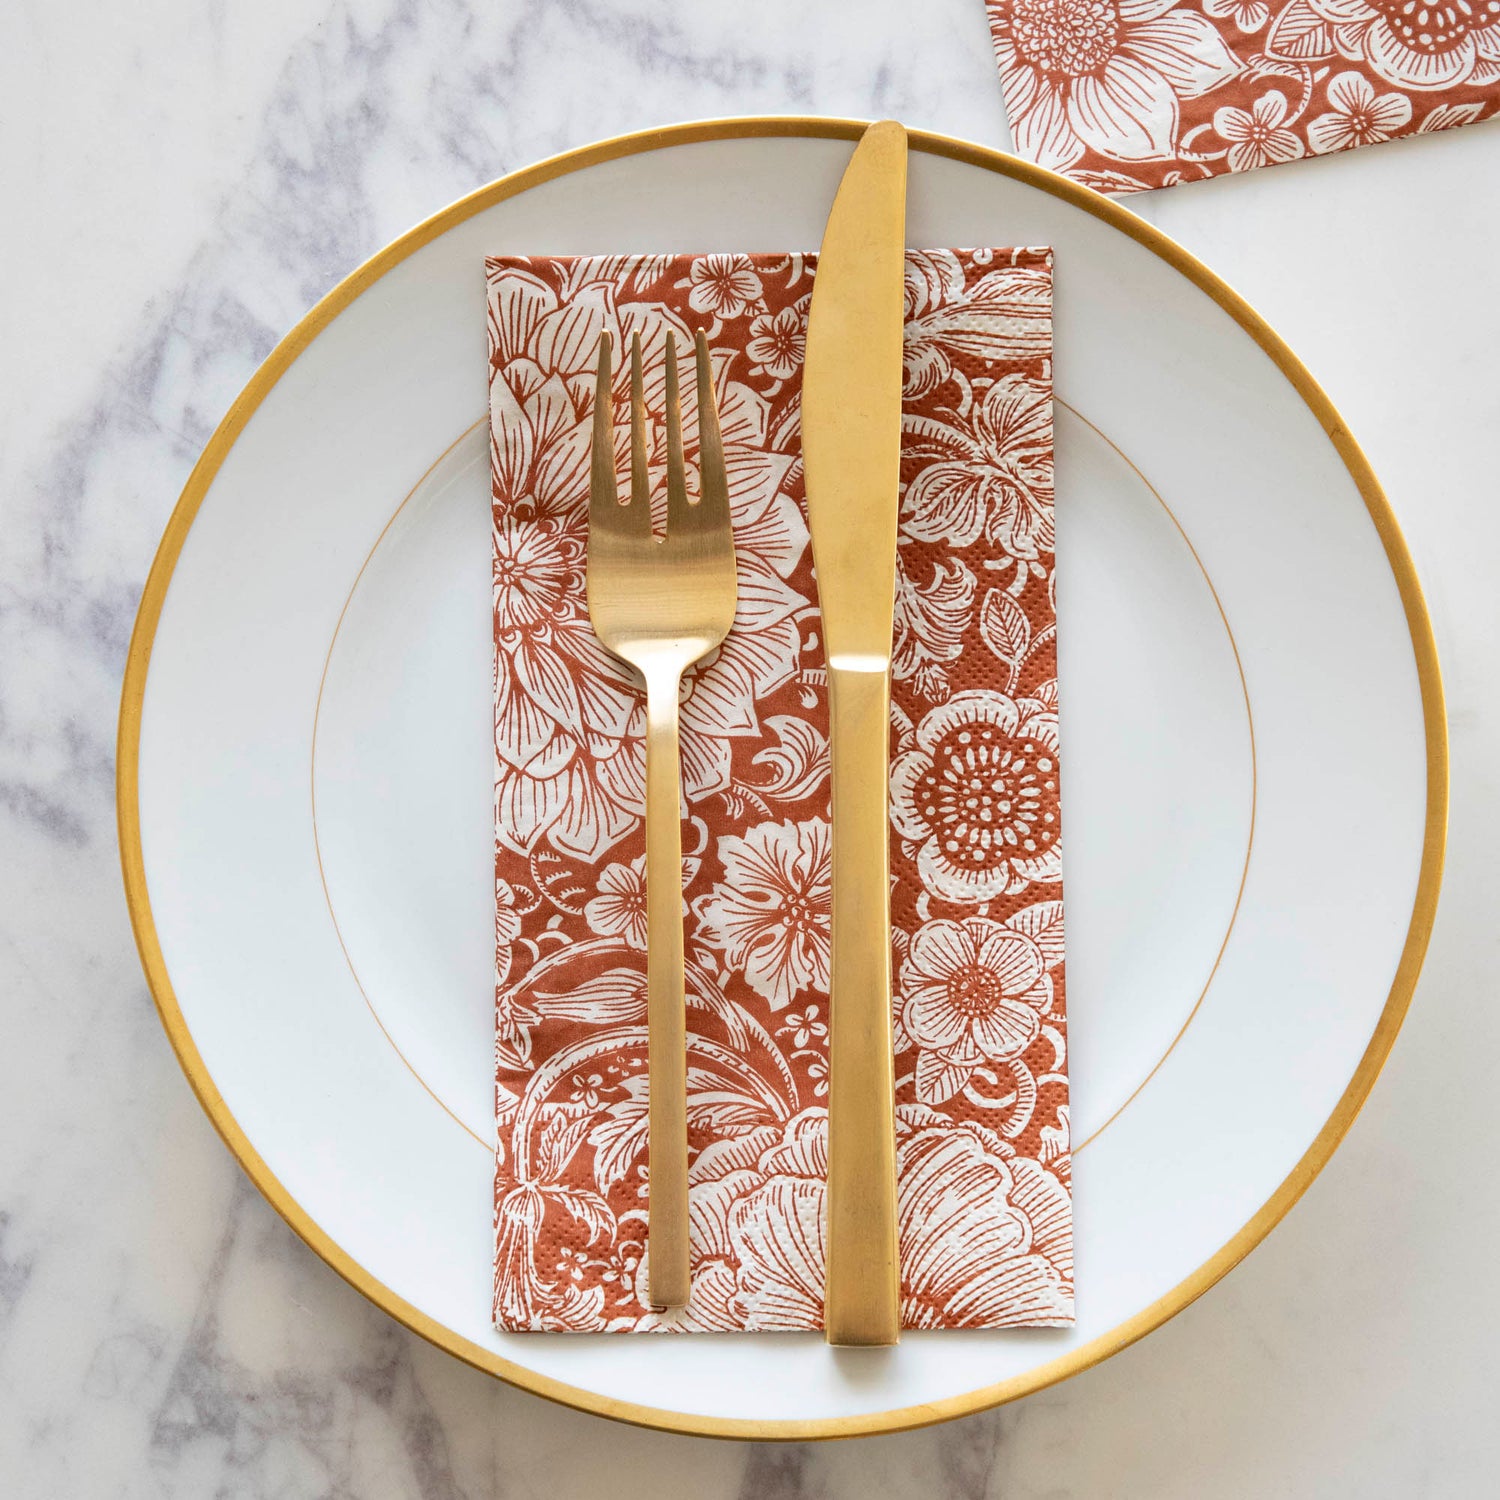 A Harvest Bouquet Guest Napkin centered on a gold-rimmed white plate with gold cutlery on top, from above.